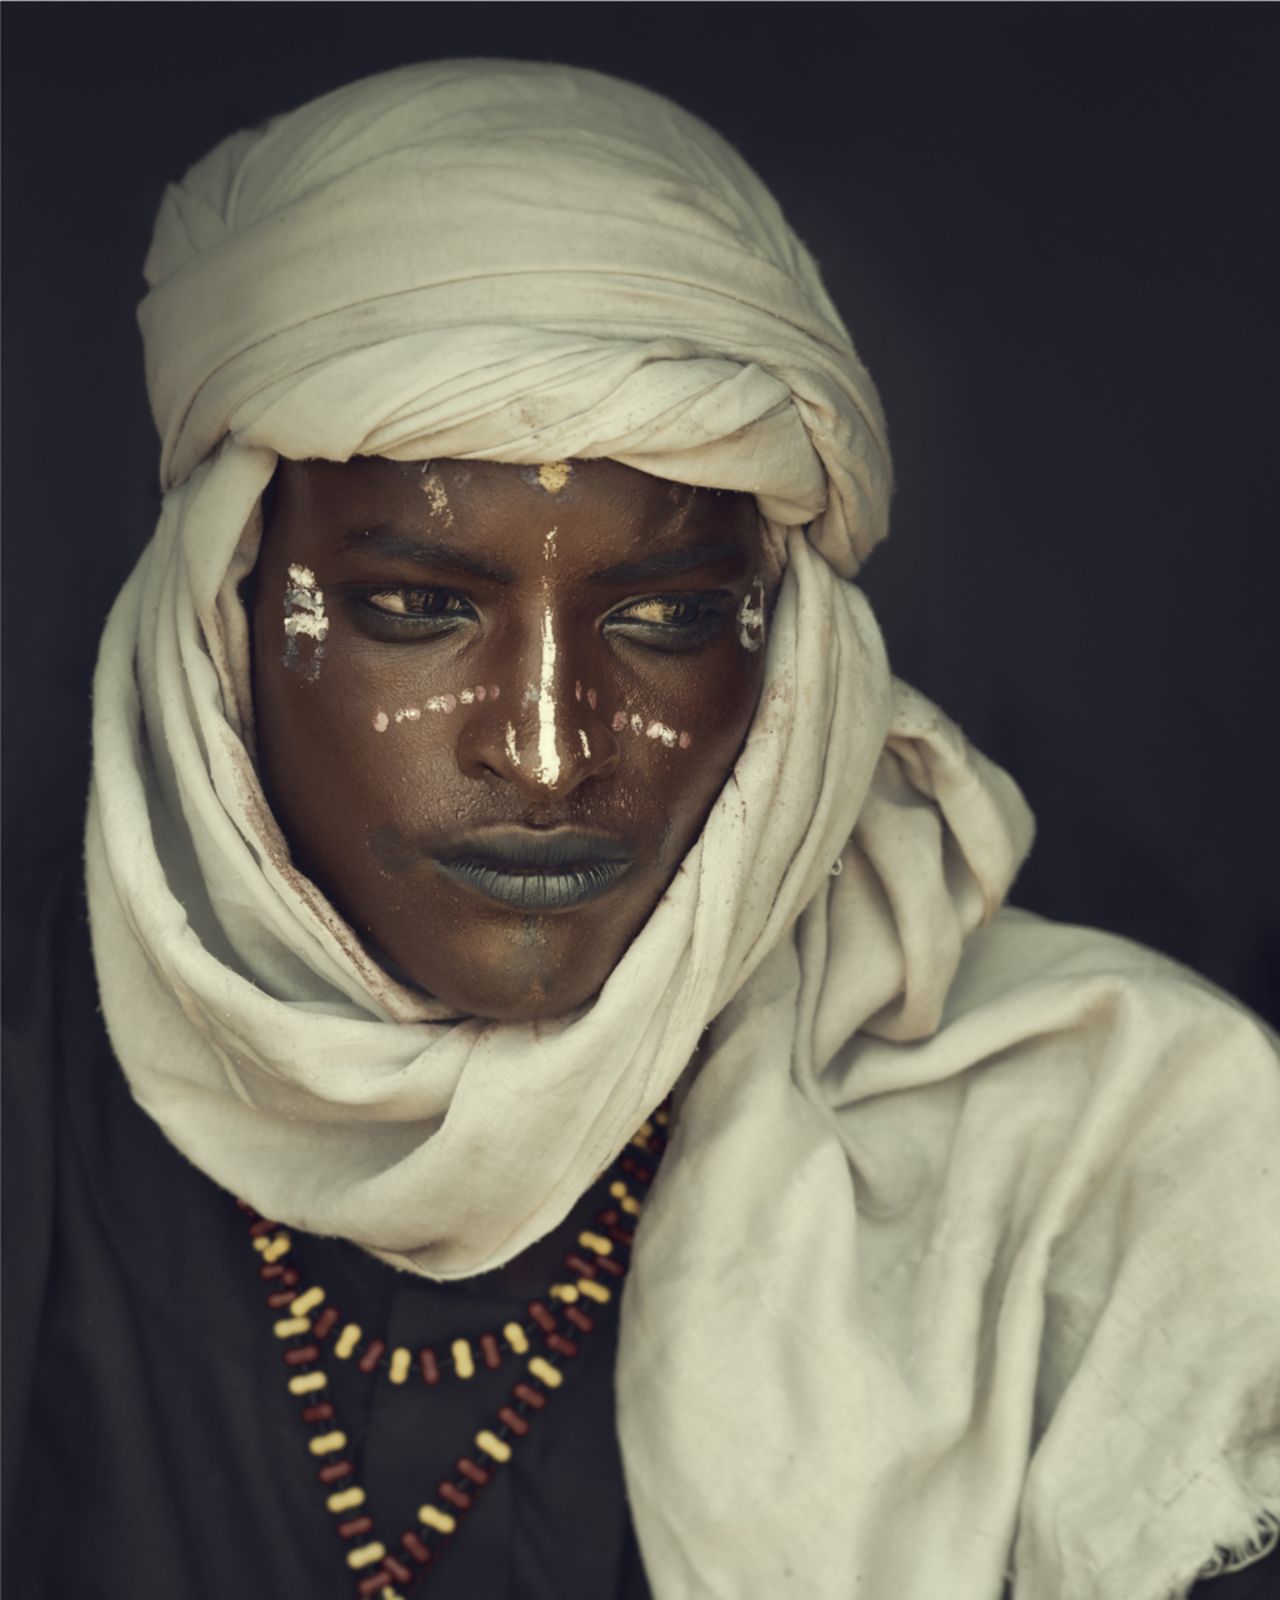 A Wodaabe man. He was photographed at the Gerewol festival (a male beauty competition) in the Chari-Baguirm region of Chad in 2016.